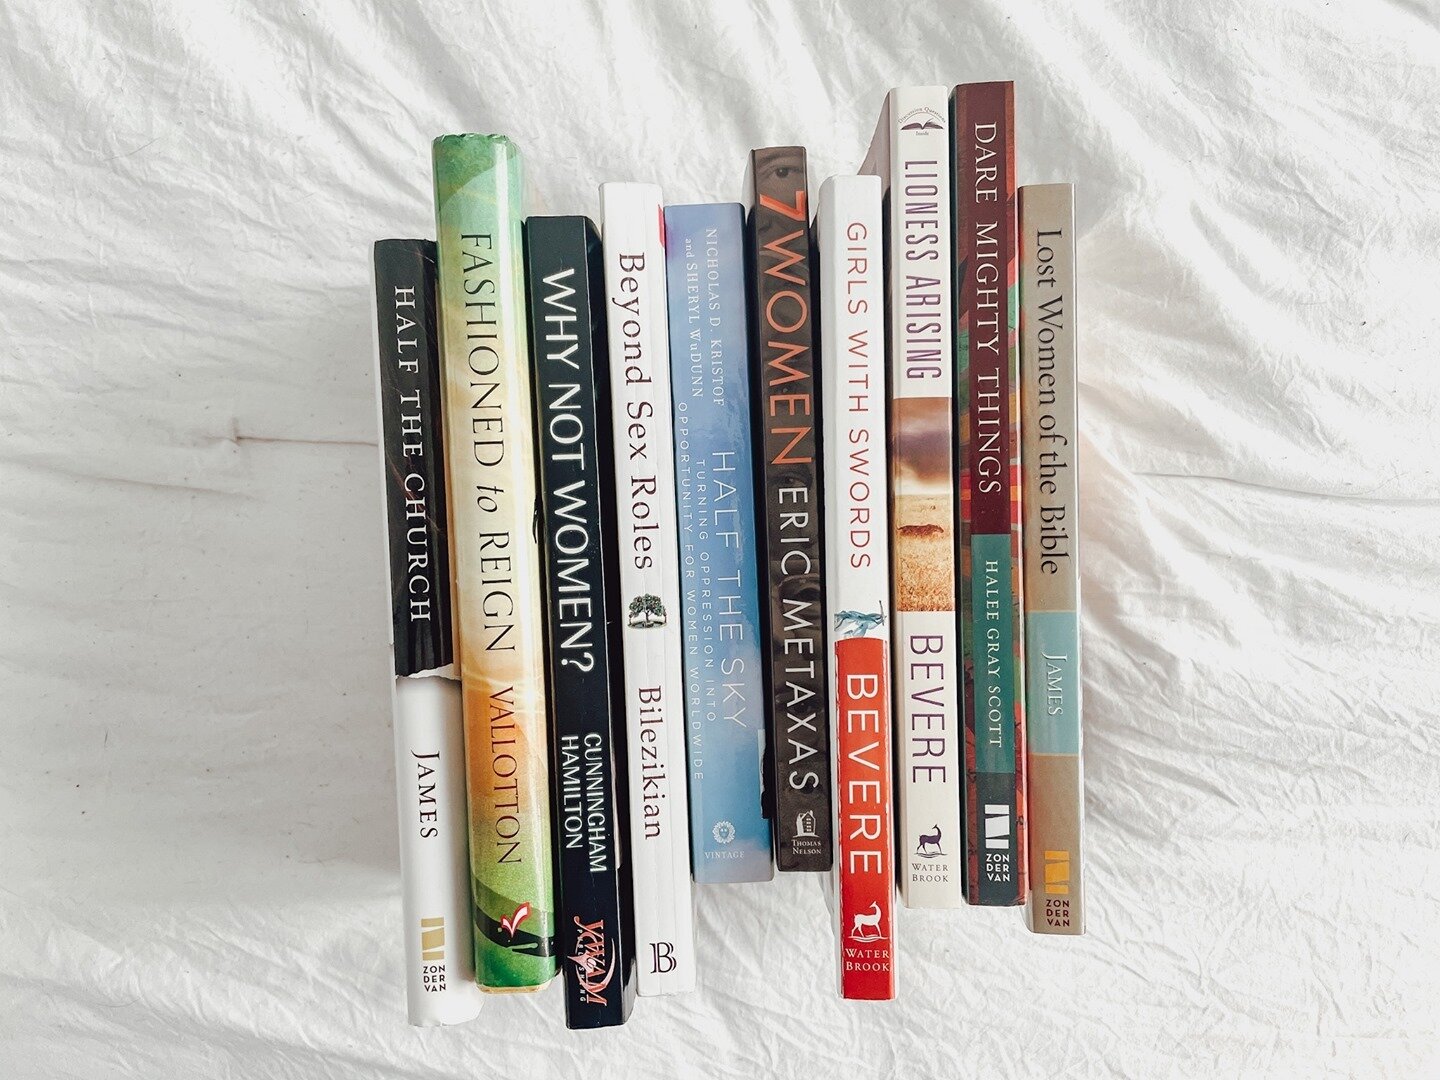 Ten books I recommend for Women's History Month. ⁠
⁠
I'm currently reading through Why Not Women and it's opening my eyes to historical context I didn't fully know or understand. ⁠
⁠
Have you read any of these books? Are there any other books you wou